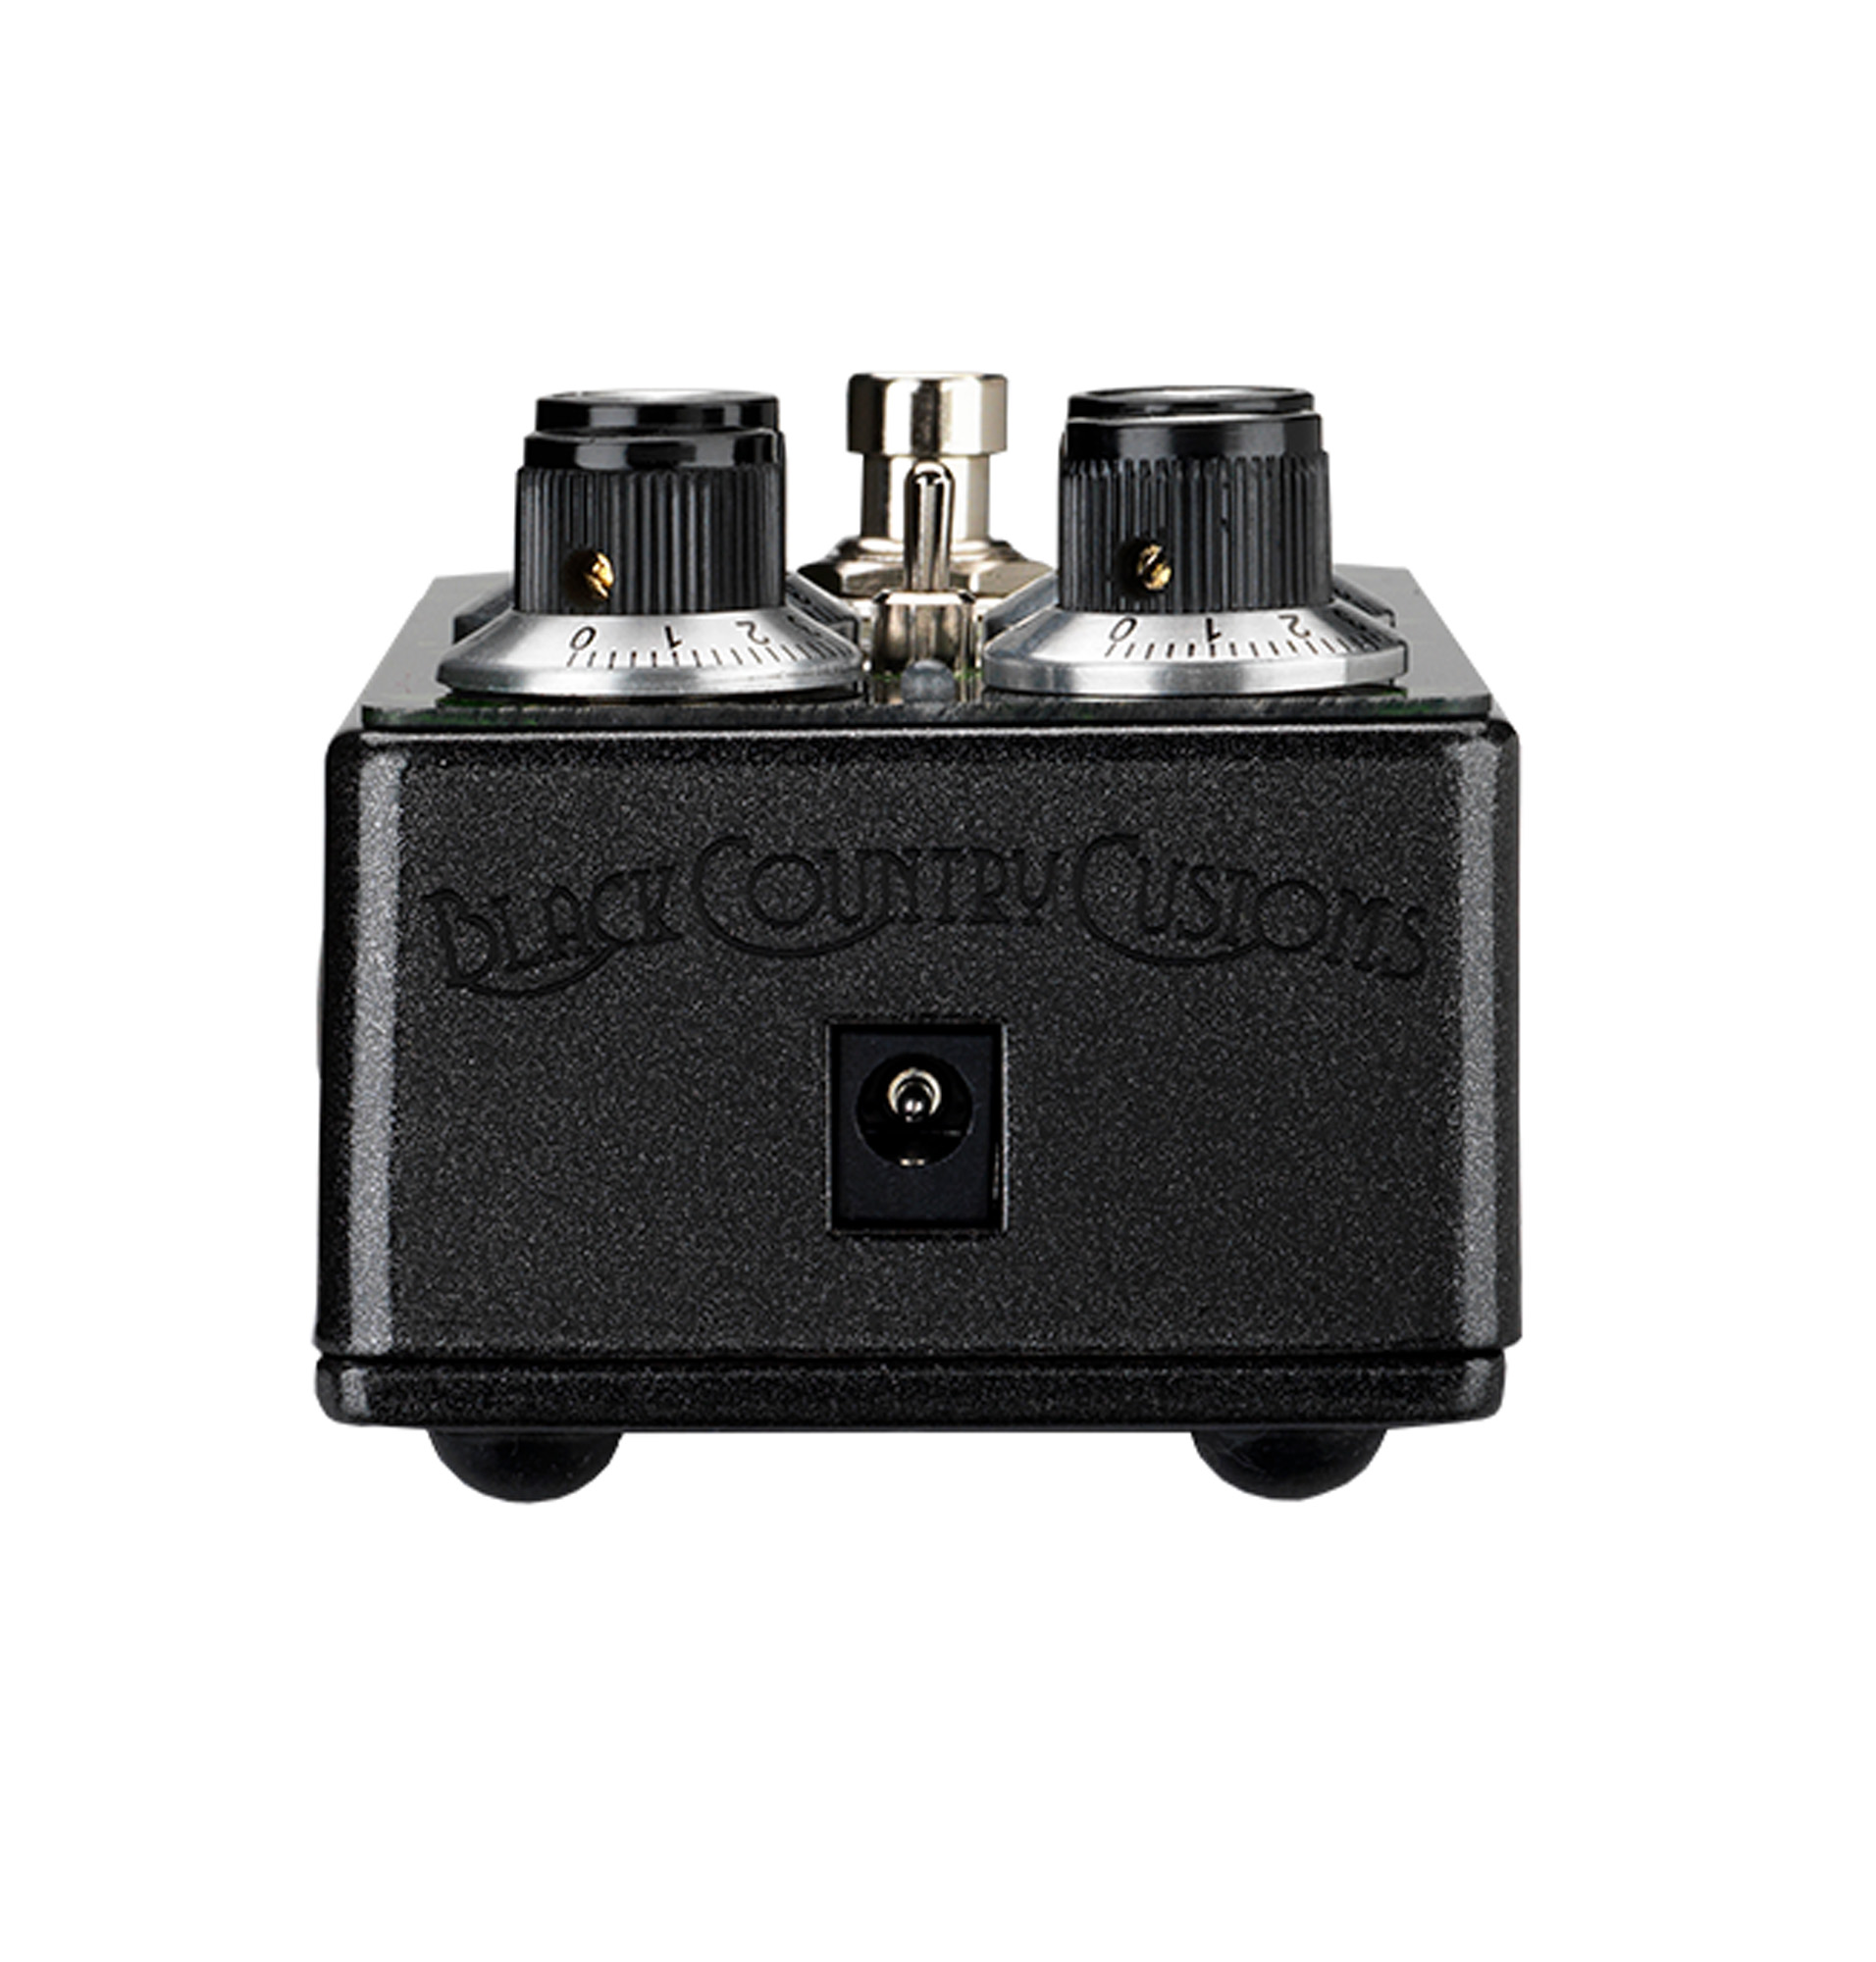 Laney The Custard Factory Bass Compressor Bcc Serie - Compressor, sustain & noise gate effect pedal for bass - Variation 1